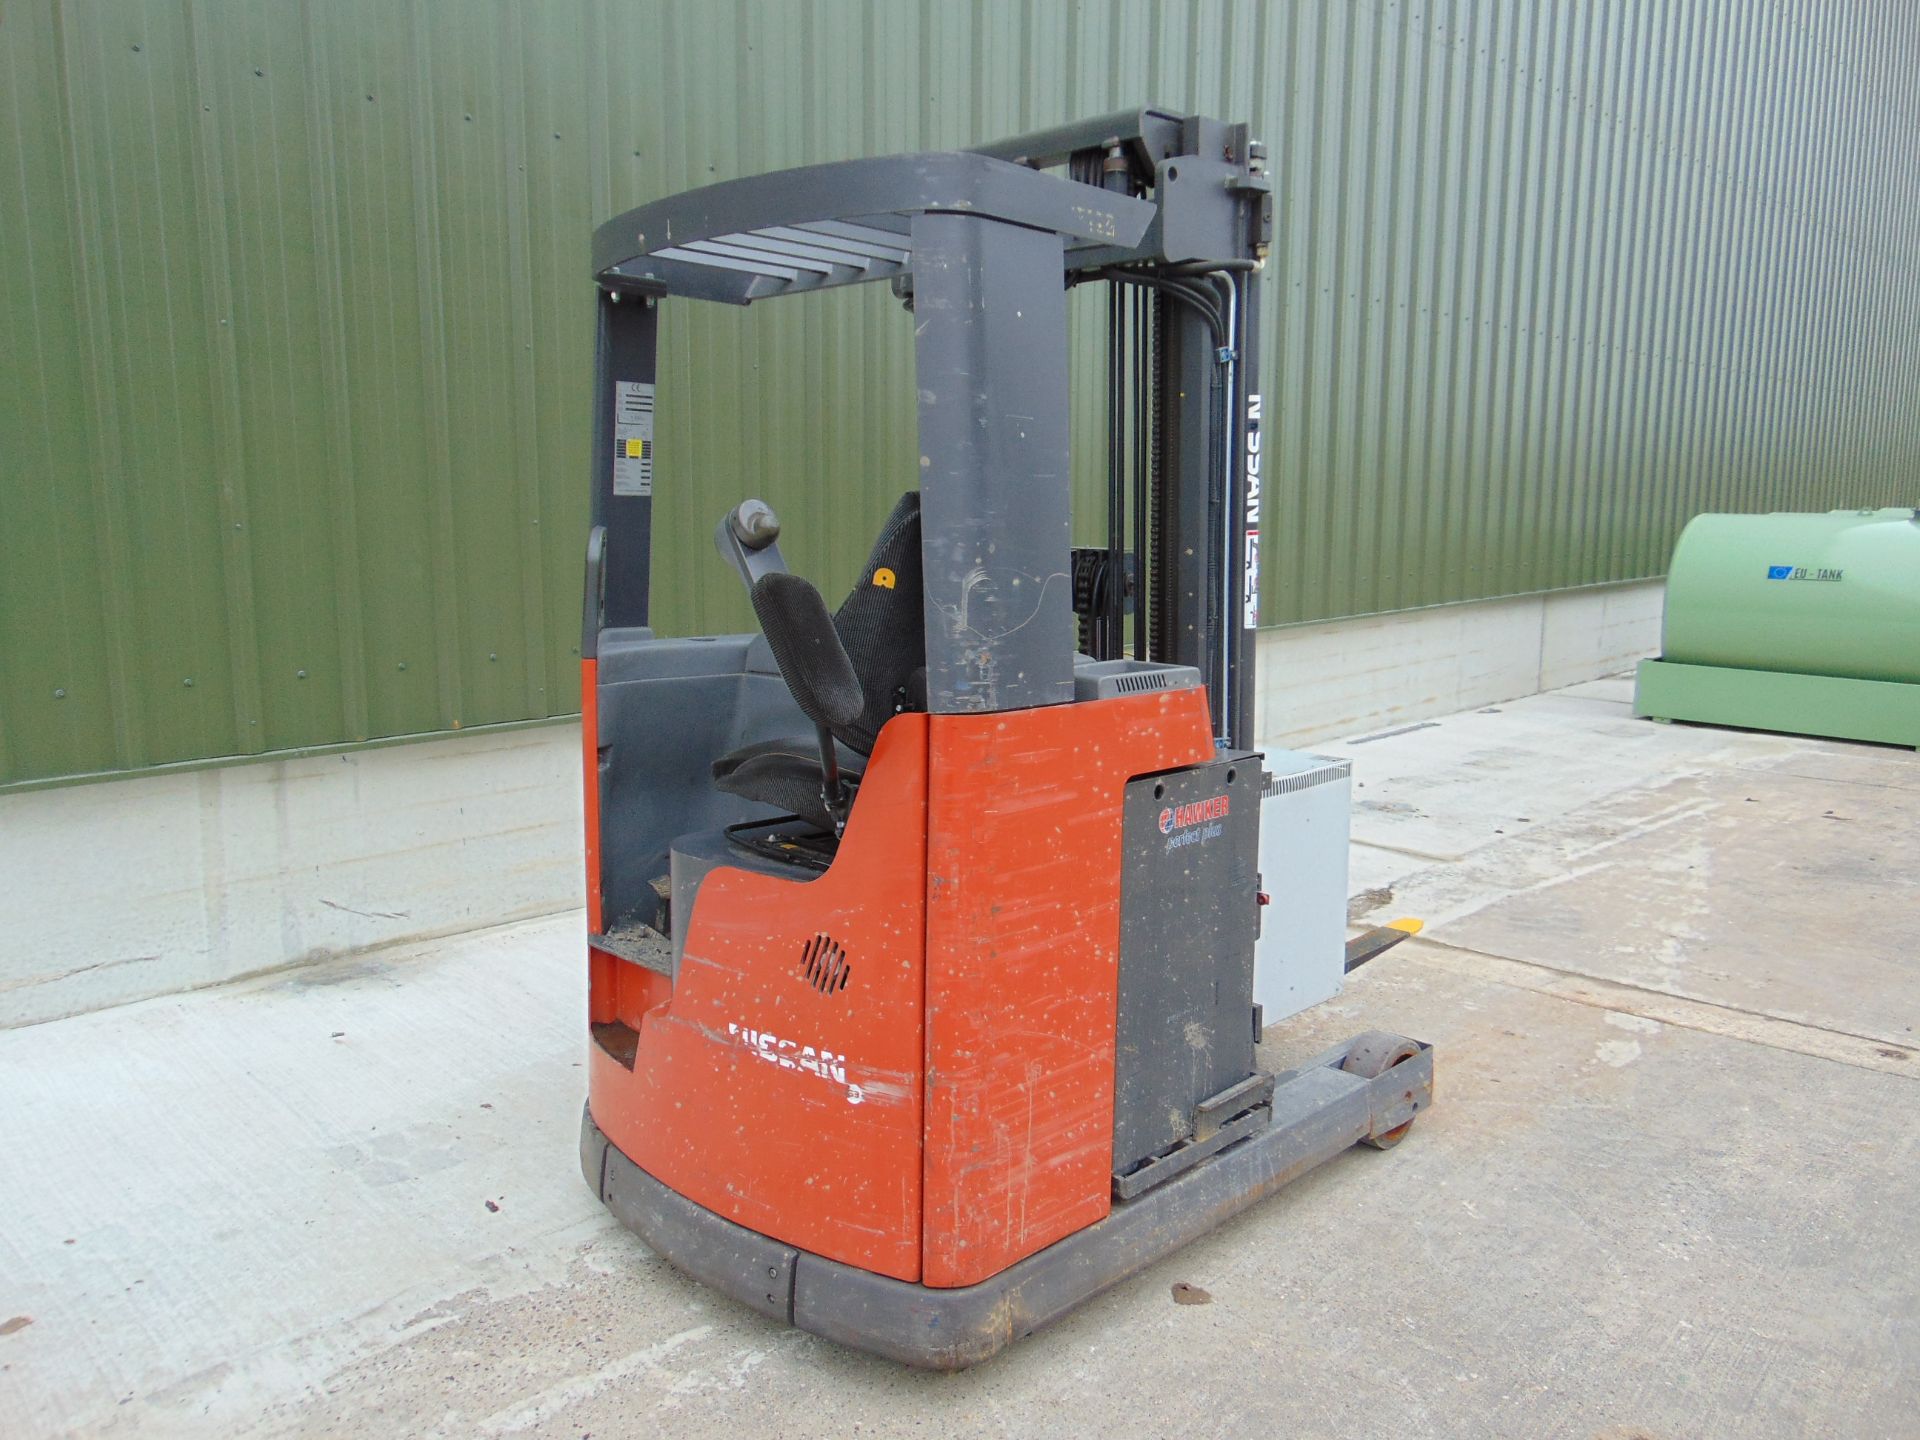 Nissan UNS-200 Electric Reach Fork Lift w/ Battery Charger Unit 2283 hrs - Image 6 of 31